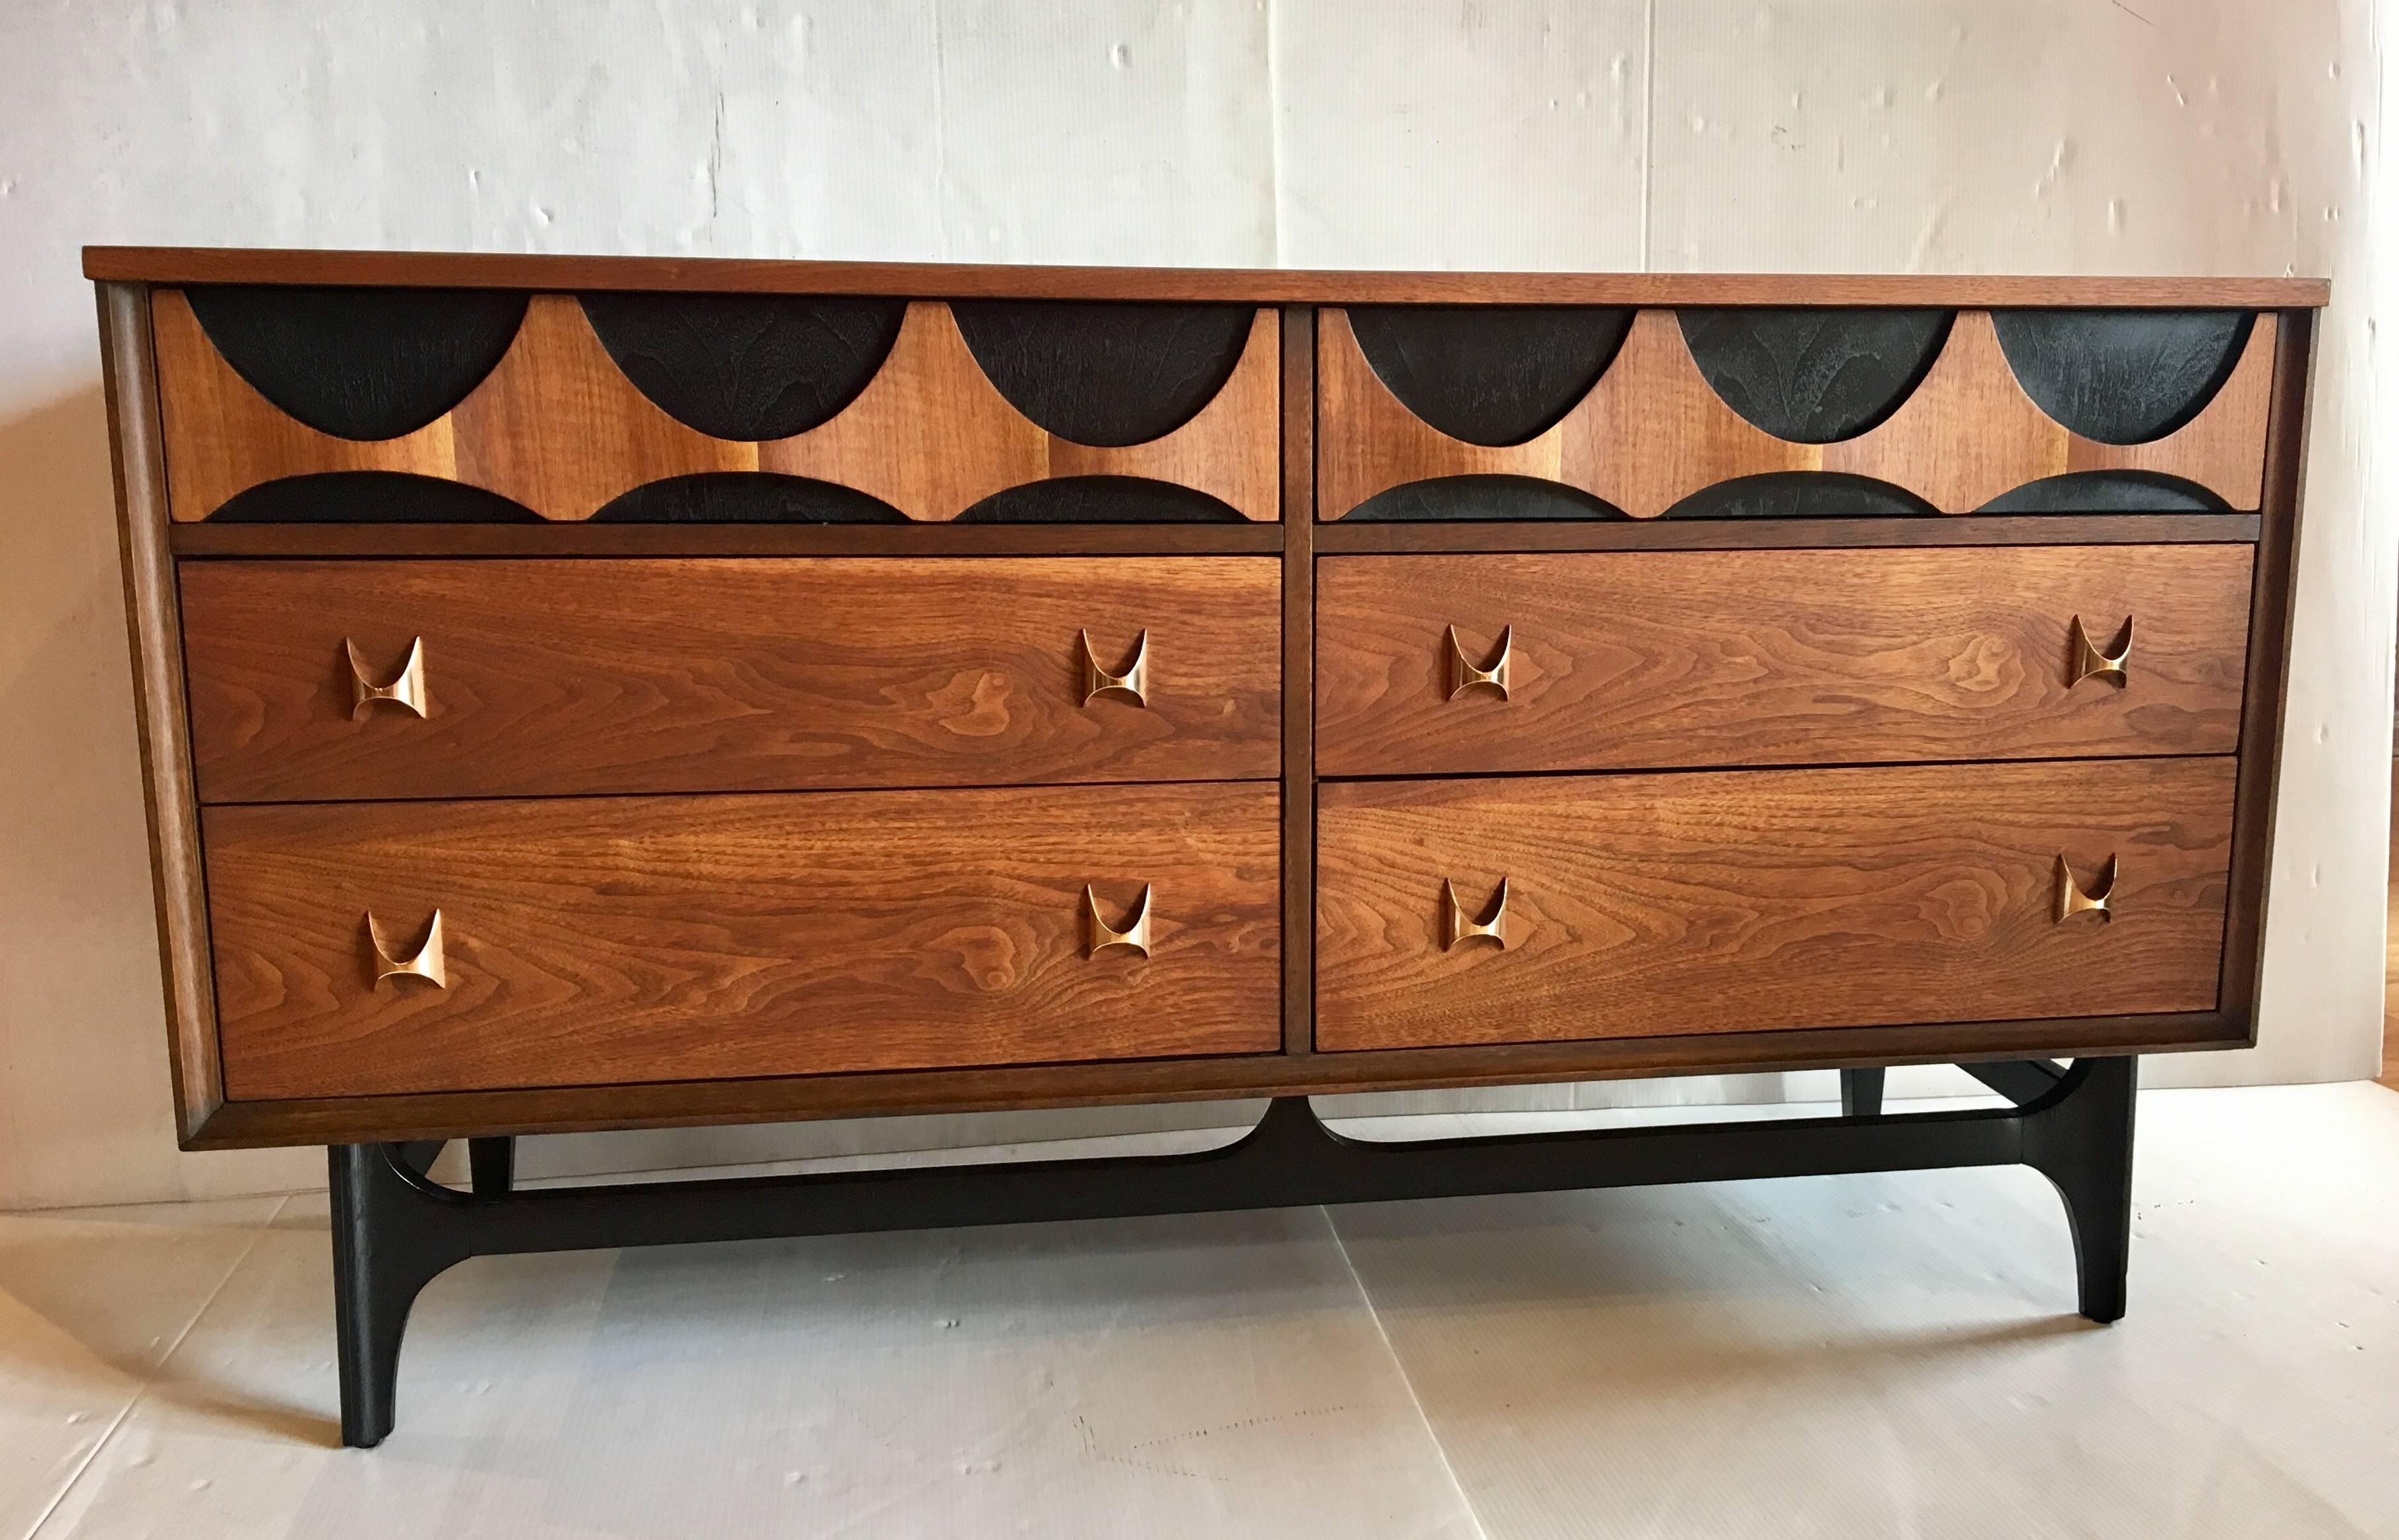 Gorgeous dresser credenza, Brasilia line by Broyhill in walnut finish with black lacquer accents and base, brass polished sculptural handles, totally refinished in great condition.